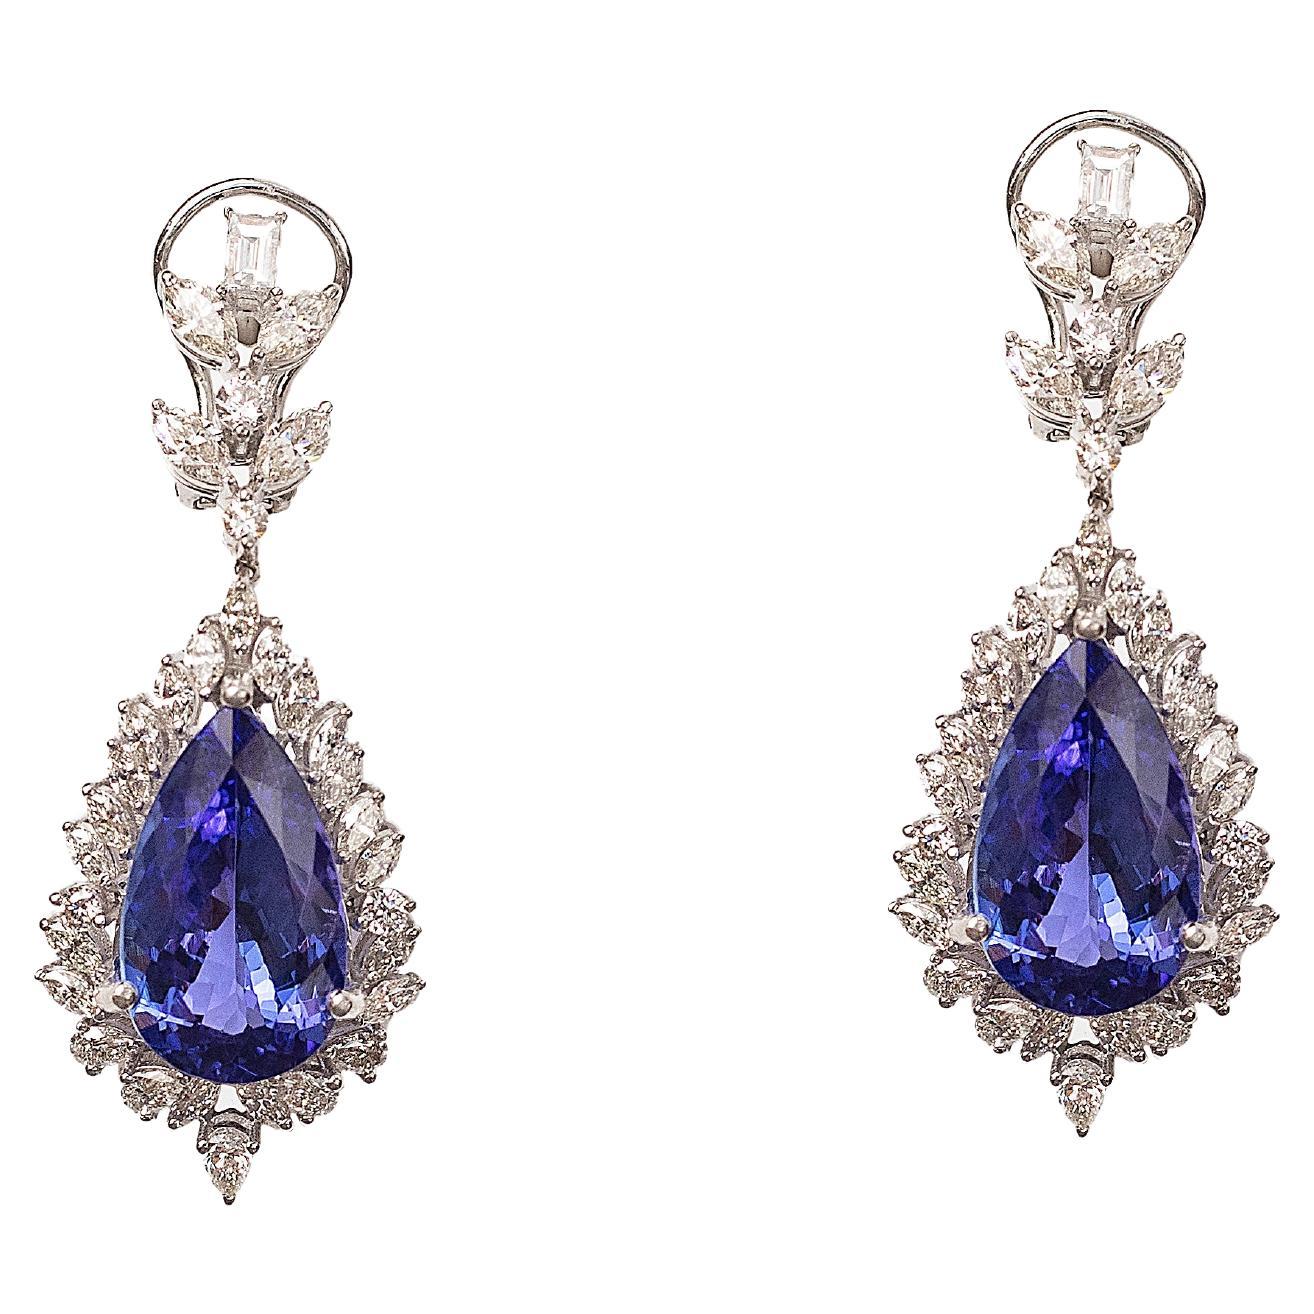 4.39 Cts Diamond and 18.87 Cts Natural Tanzanite Dangling Earring in 18k Gold